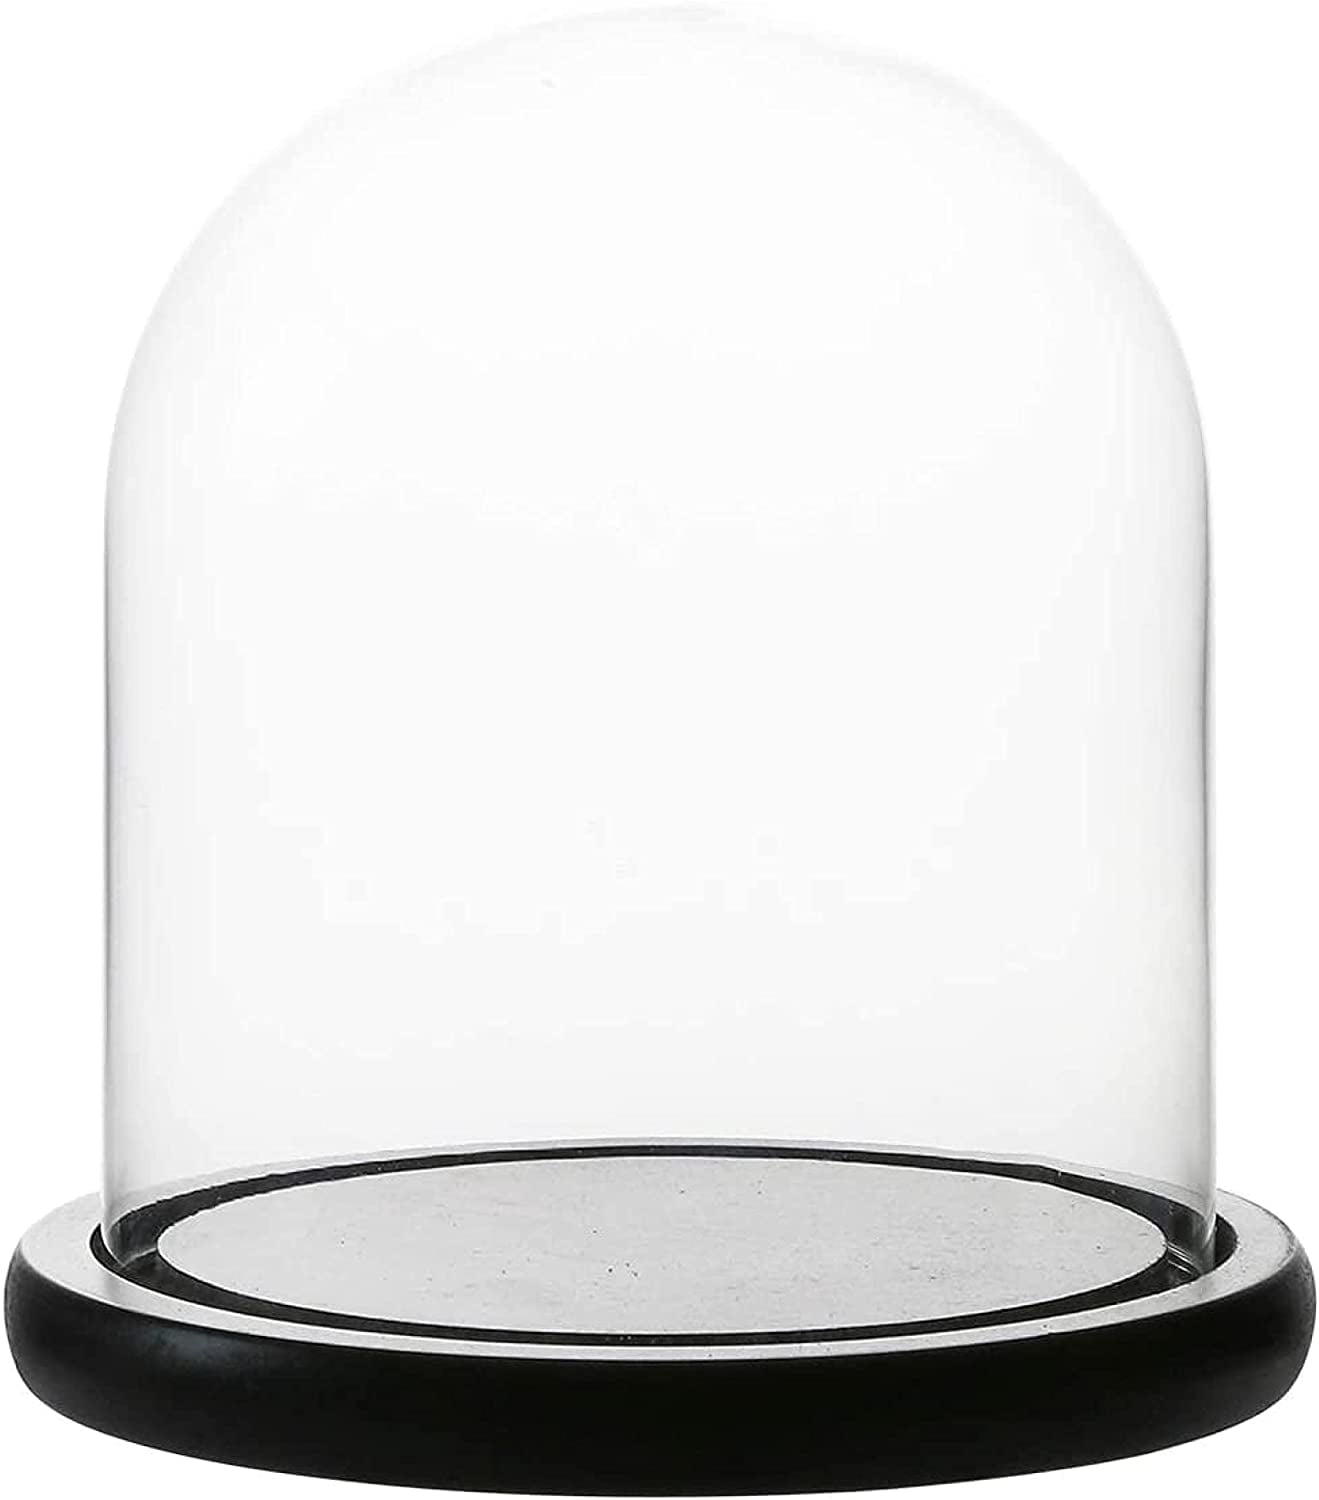 8"d X 12"t GLASS DISPLAY DOME CLOCHE on WOOD BASE 